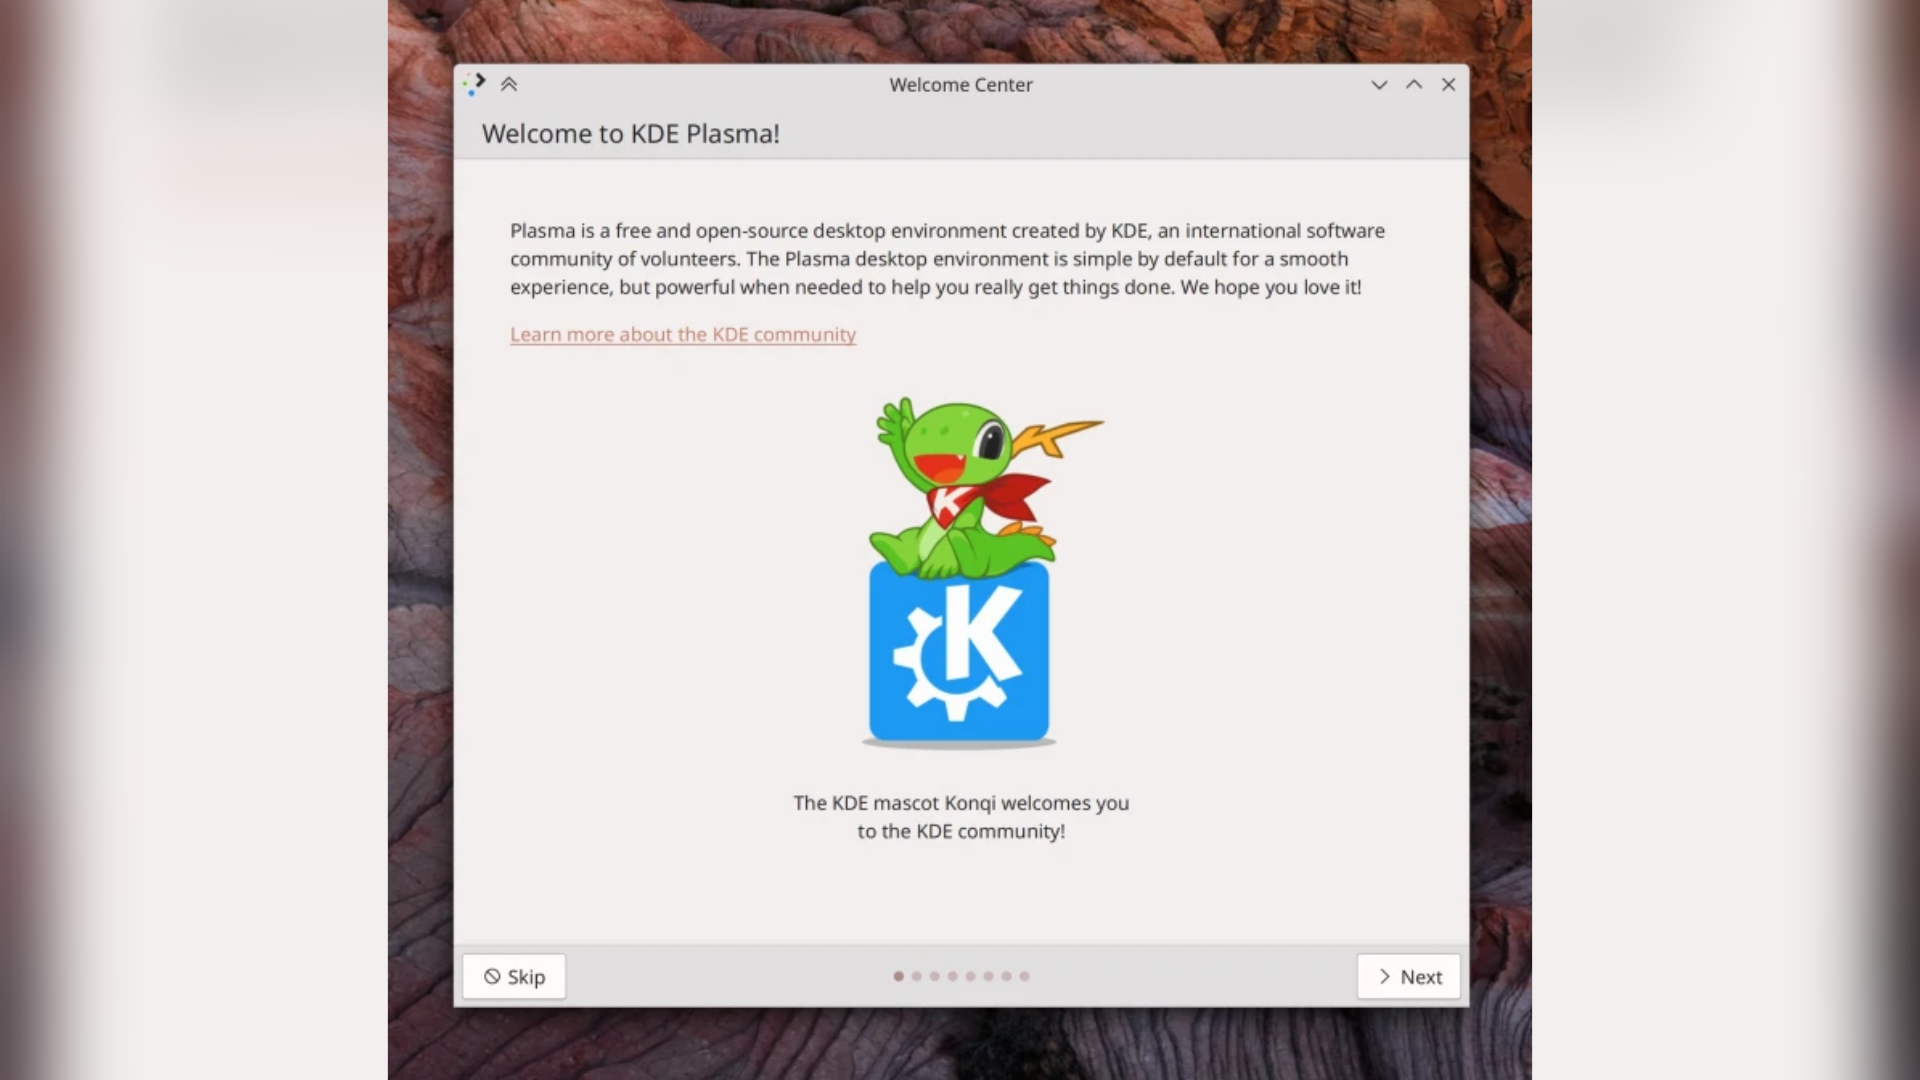 KDE Welcome application, with the header area only containing the text "Welcome to KDE Plasma!" and the footer having "Skip" and "Next" buttons, along with dots to represent the number of pages.